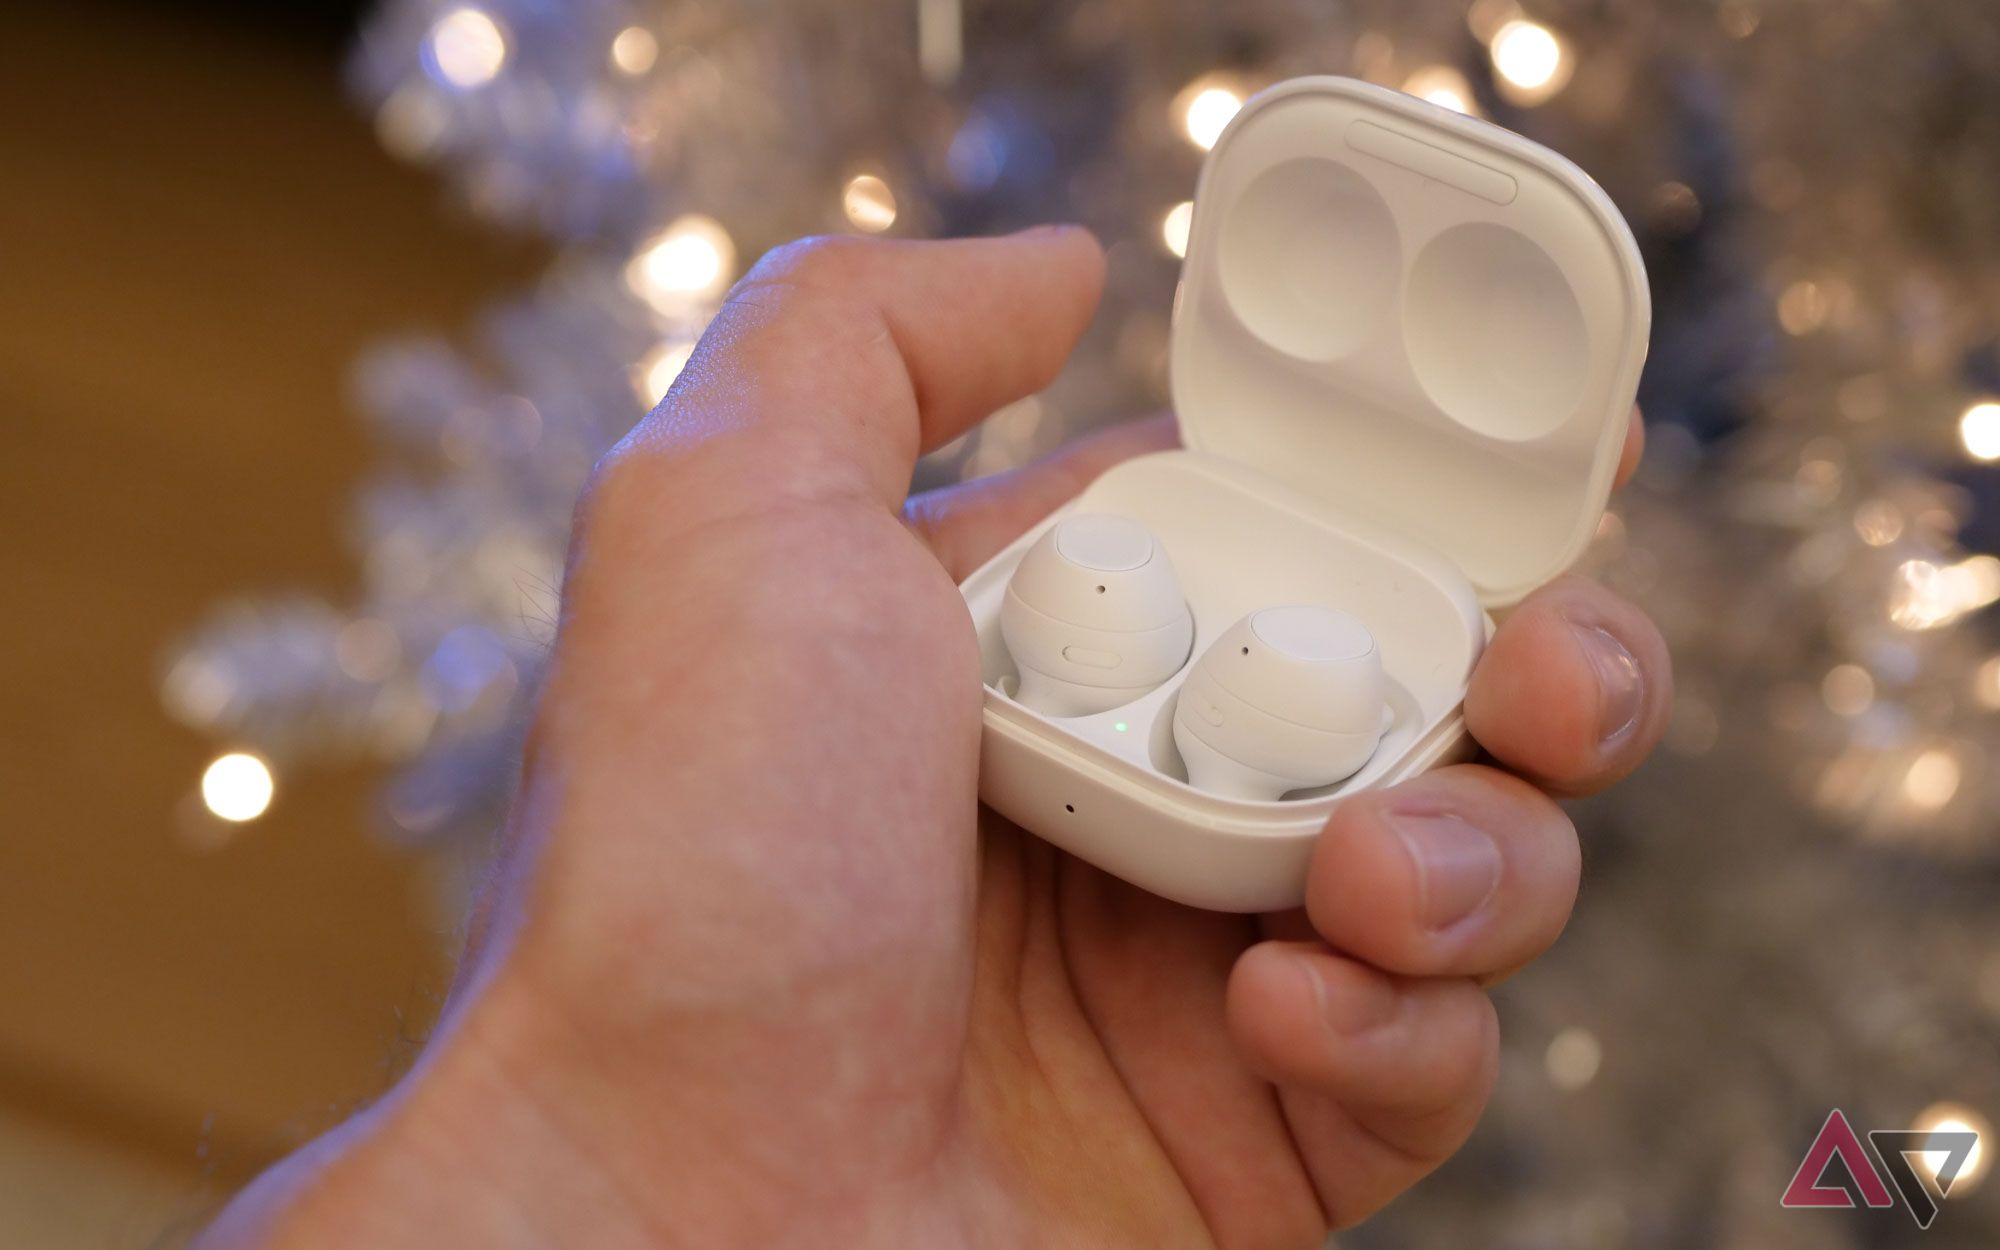 White Samsung Galaxy Buds FE in the hands of a user